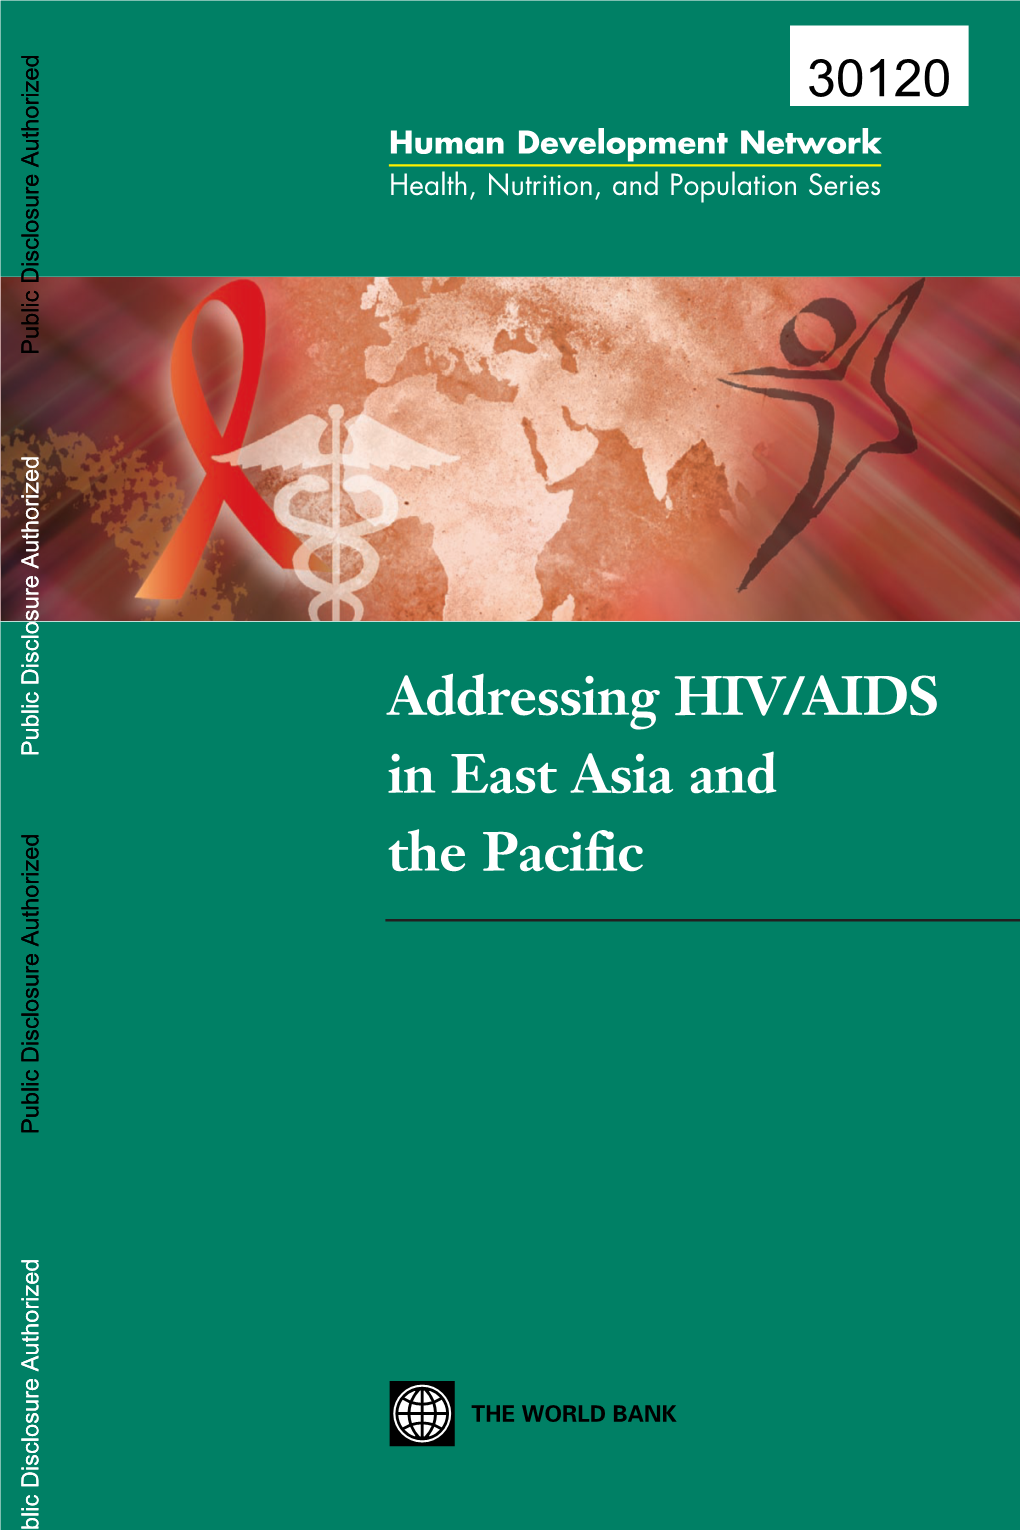 Addressing HIV/AIDS in East Asia and the Pacific Outlines a Strategic Direction the World Bank Can Use to Respond to This Enormous Challenge